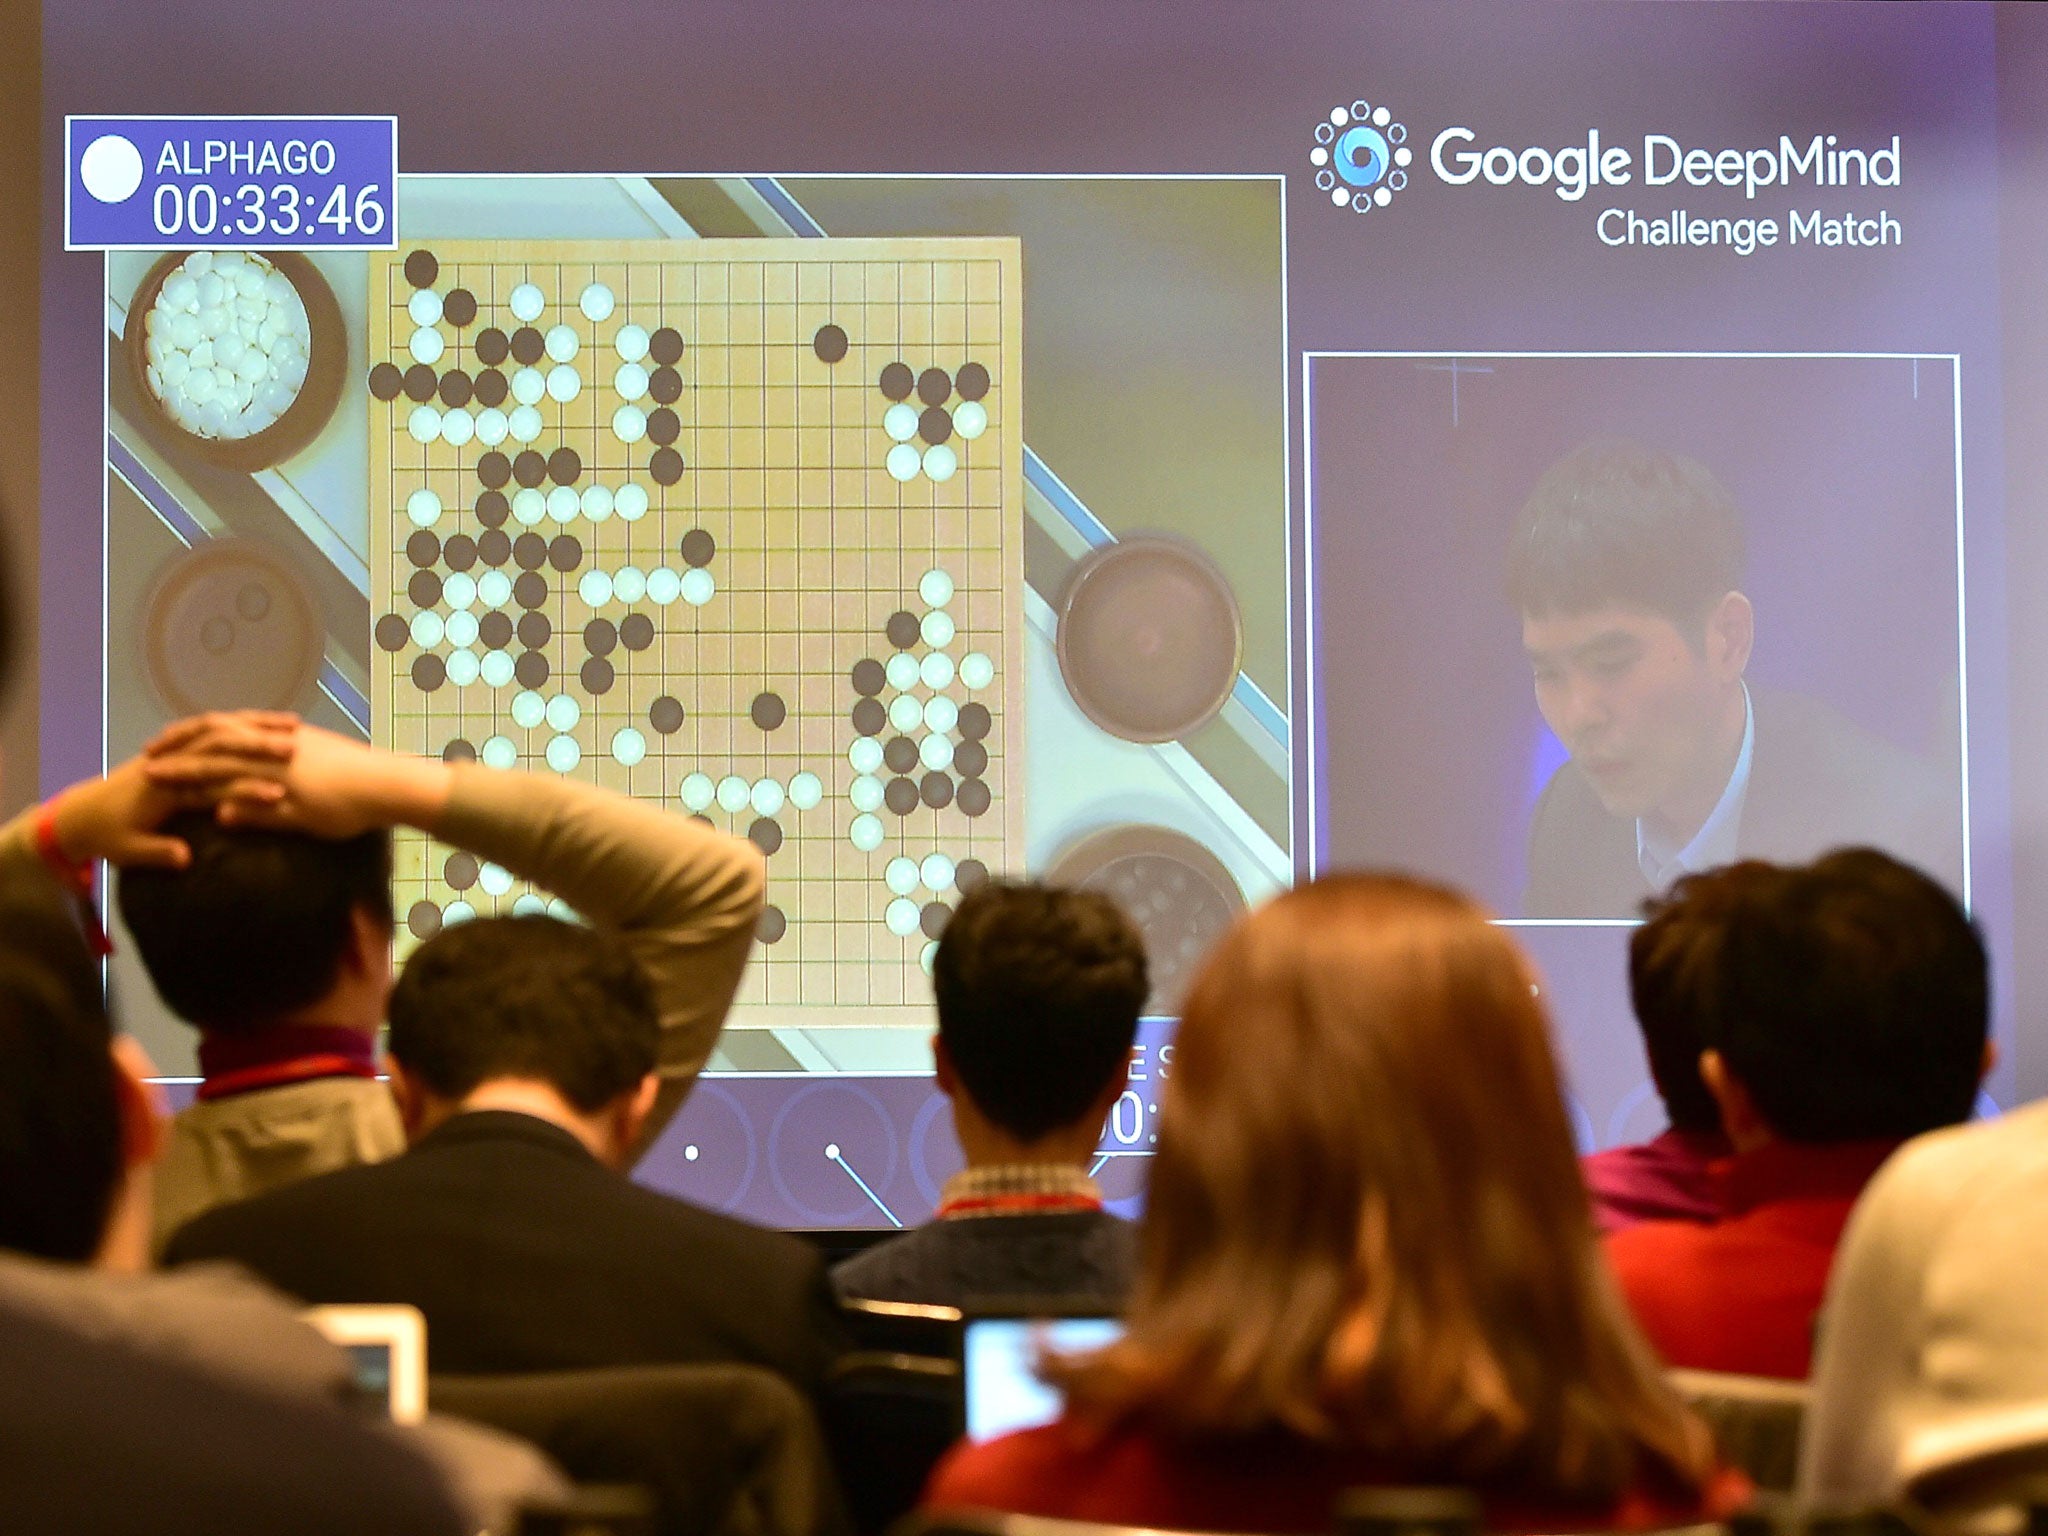 The five-match series of games took place between one of the world's top-rated Go players, Lee Se-dol, and a computer opponent by the name of AlphaGo